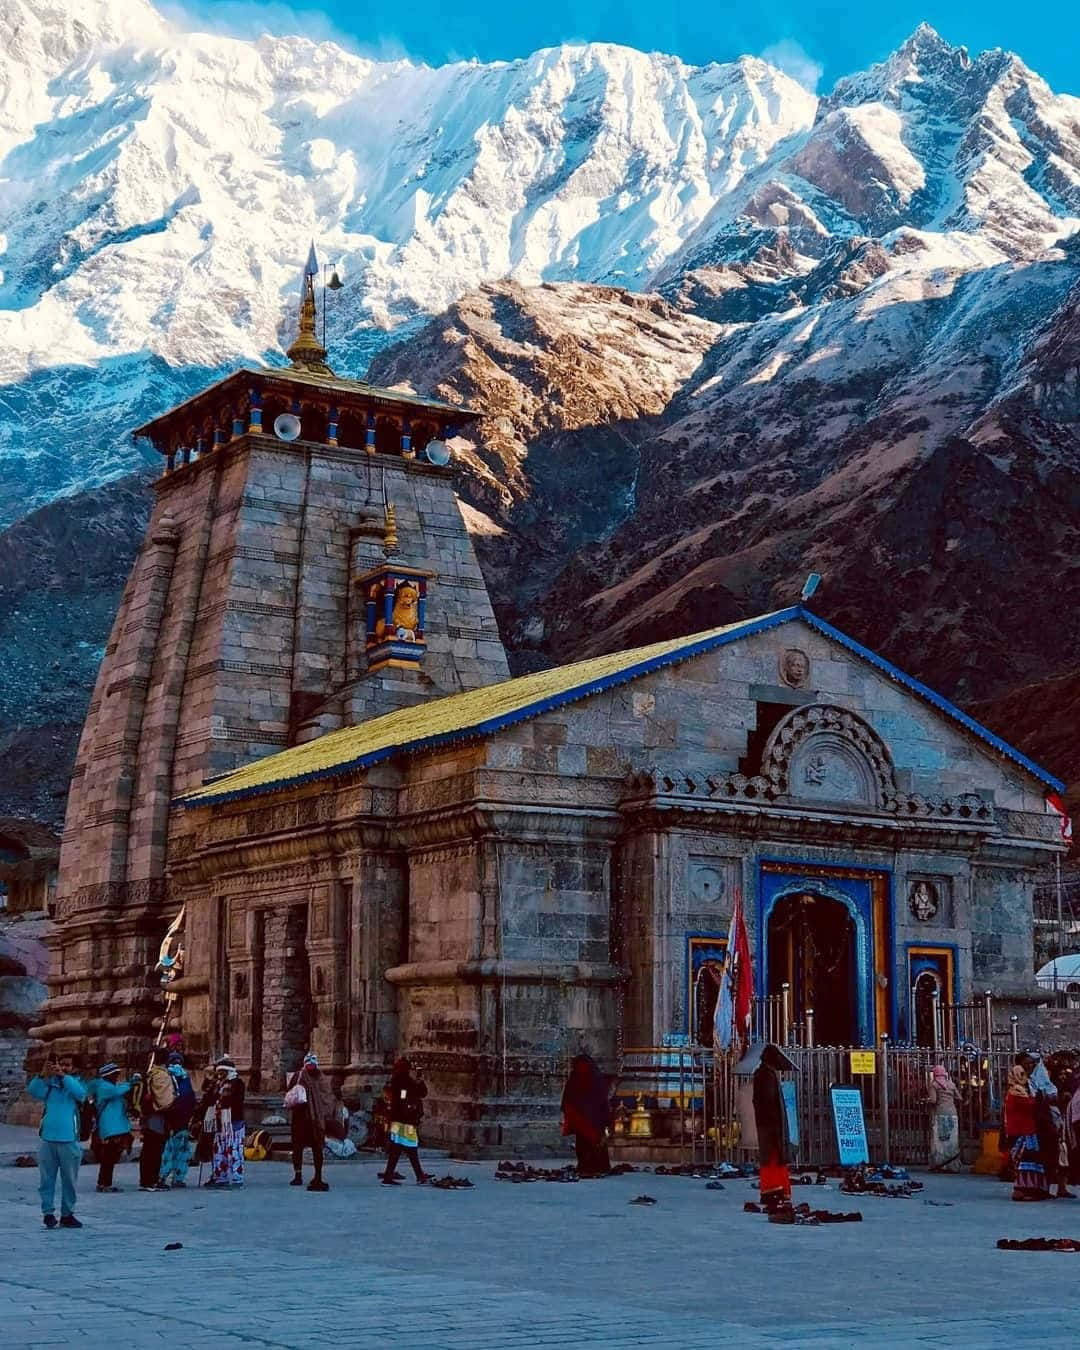 •  View of the majestic Kedarnath temple